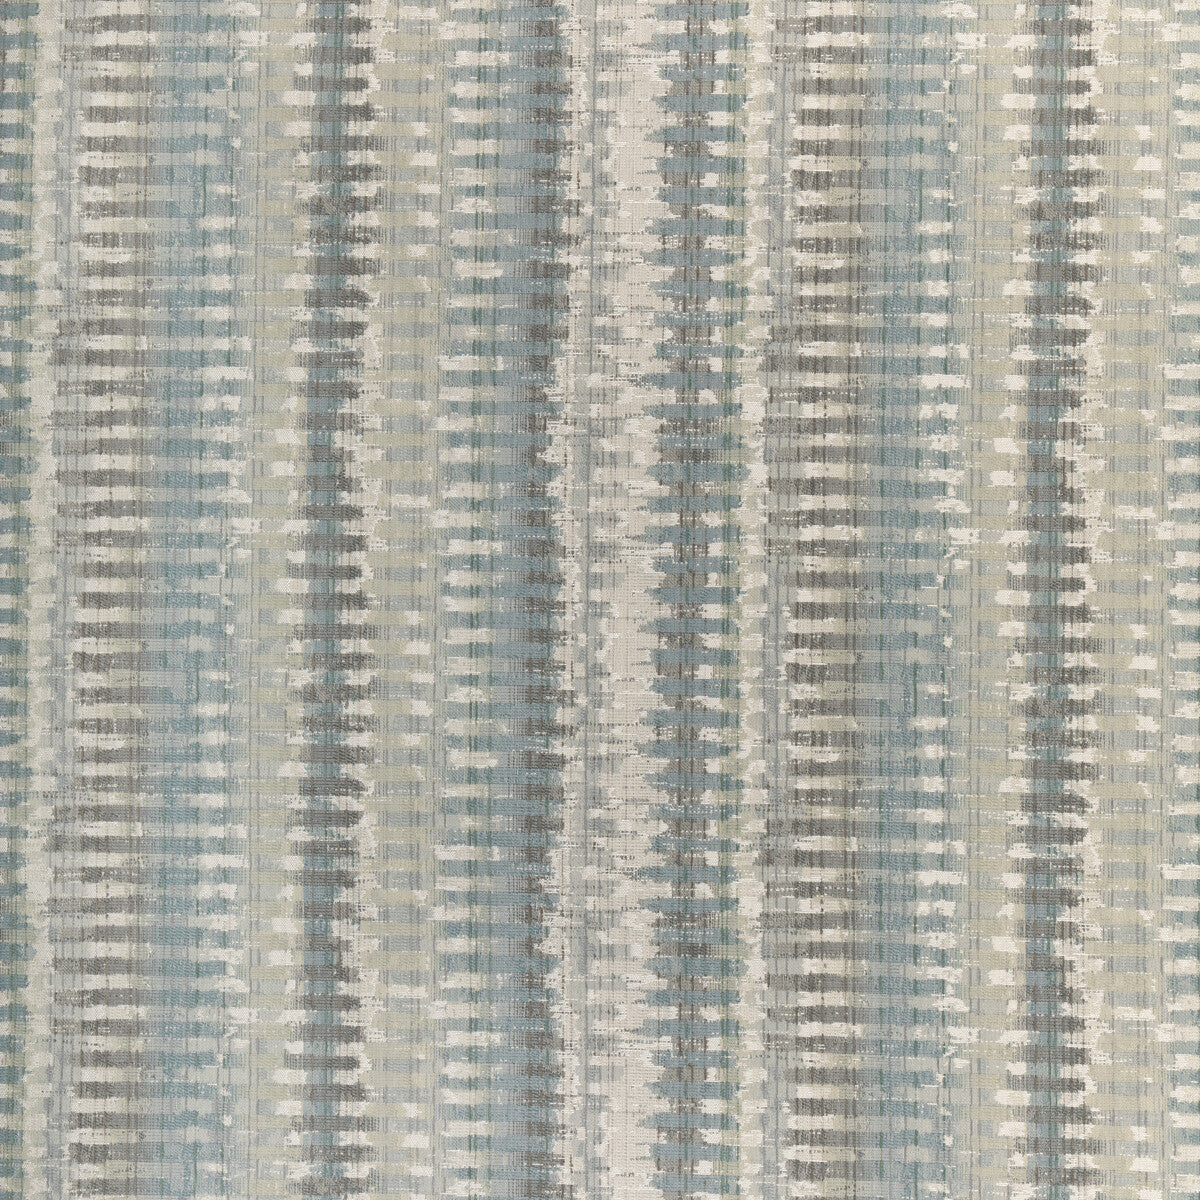 Kravet Design fabric in 37131-530 color - pattern 37131.530.0 - by Kravet Design in the Woven Colors collection